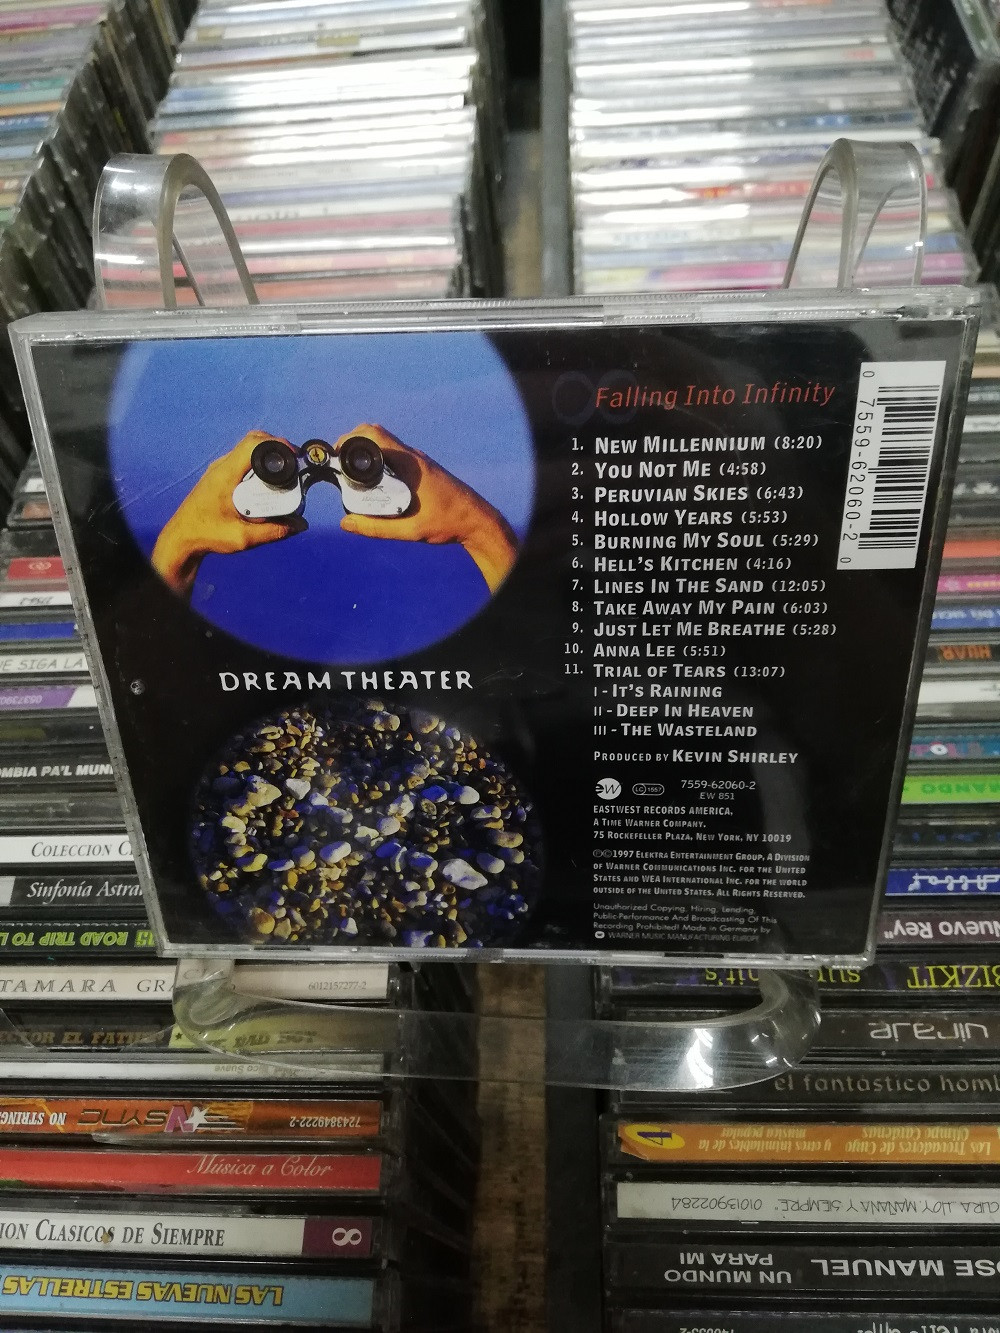 Imagen CD DREAM THEATER - FALLING INTO INFINITY 2